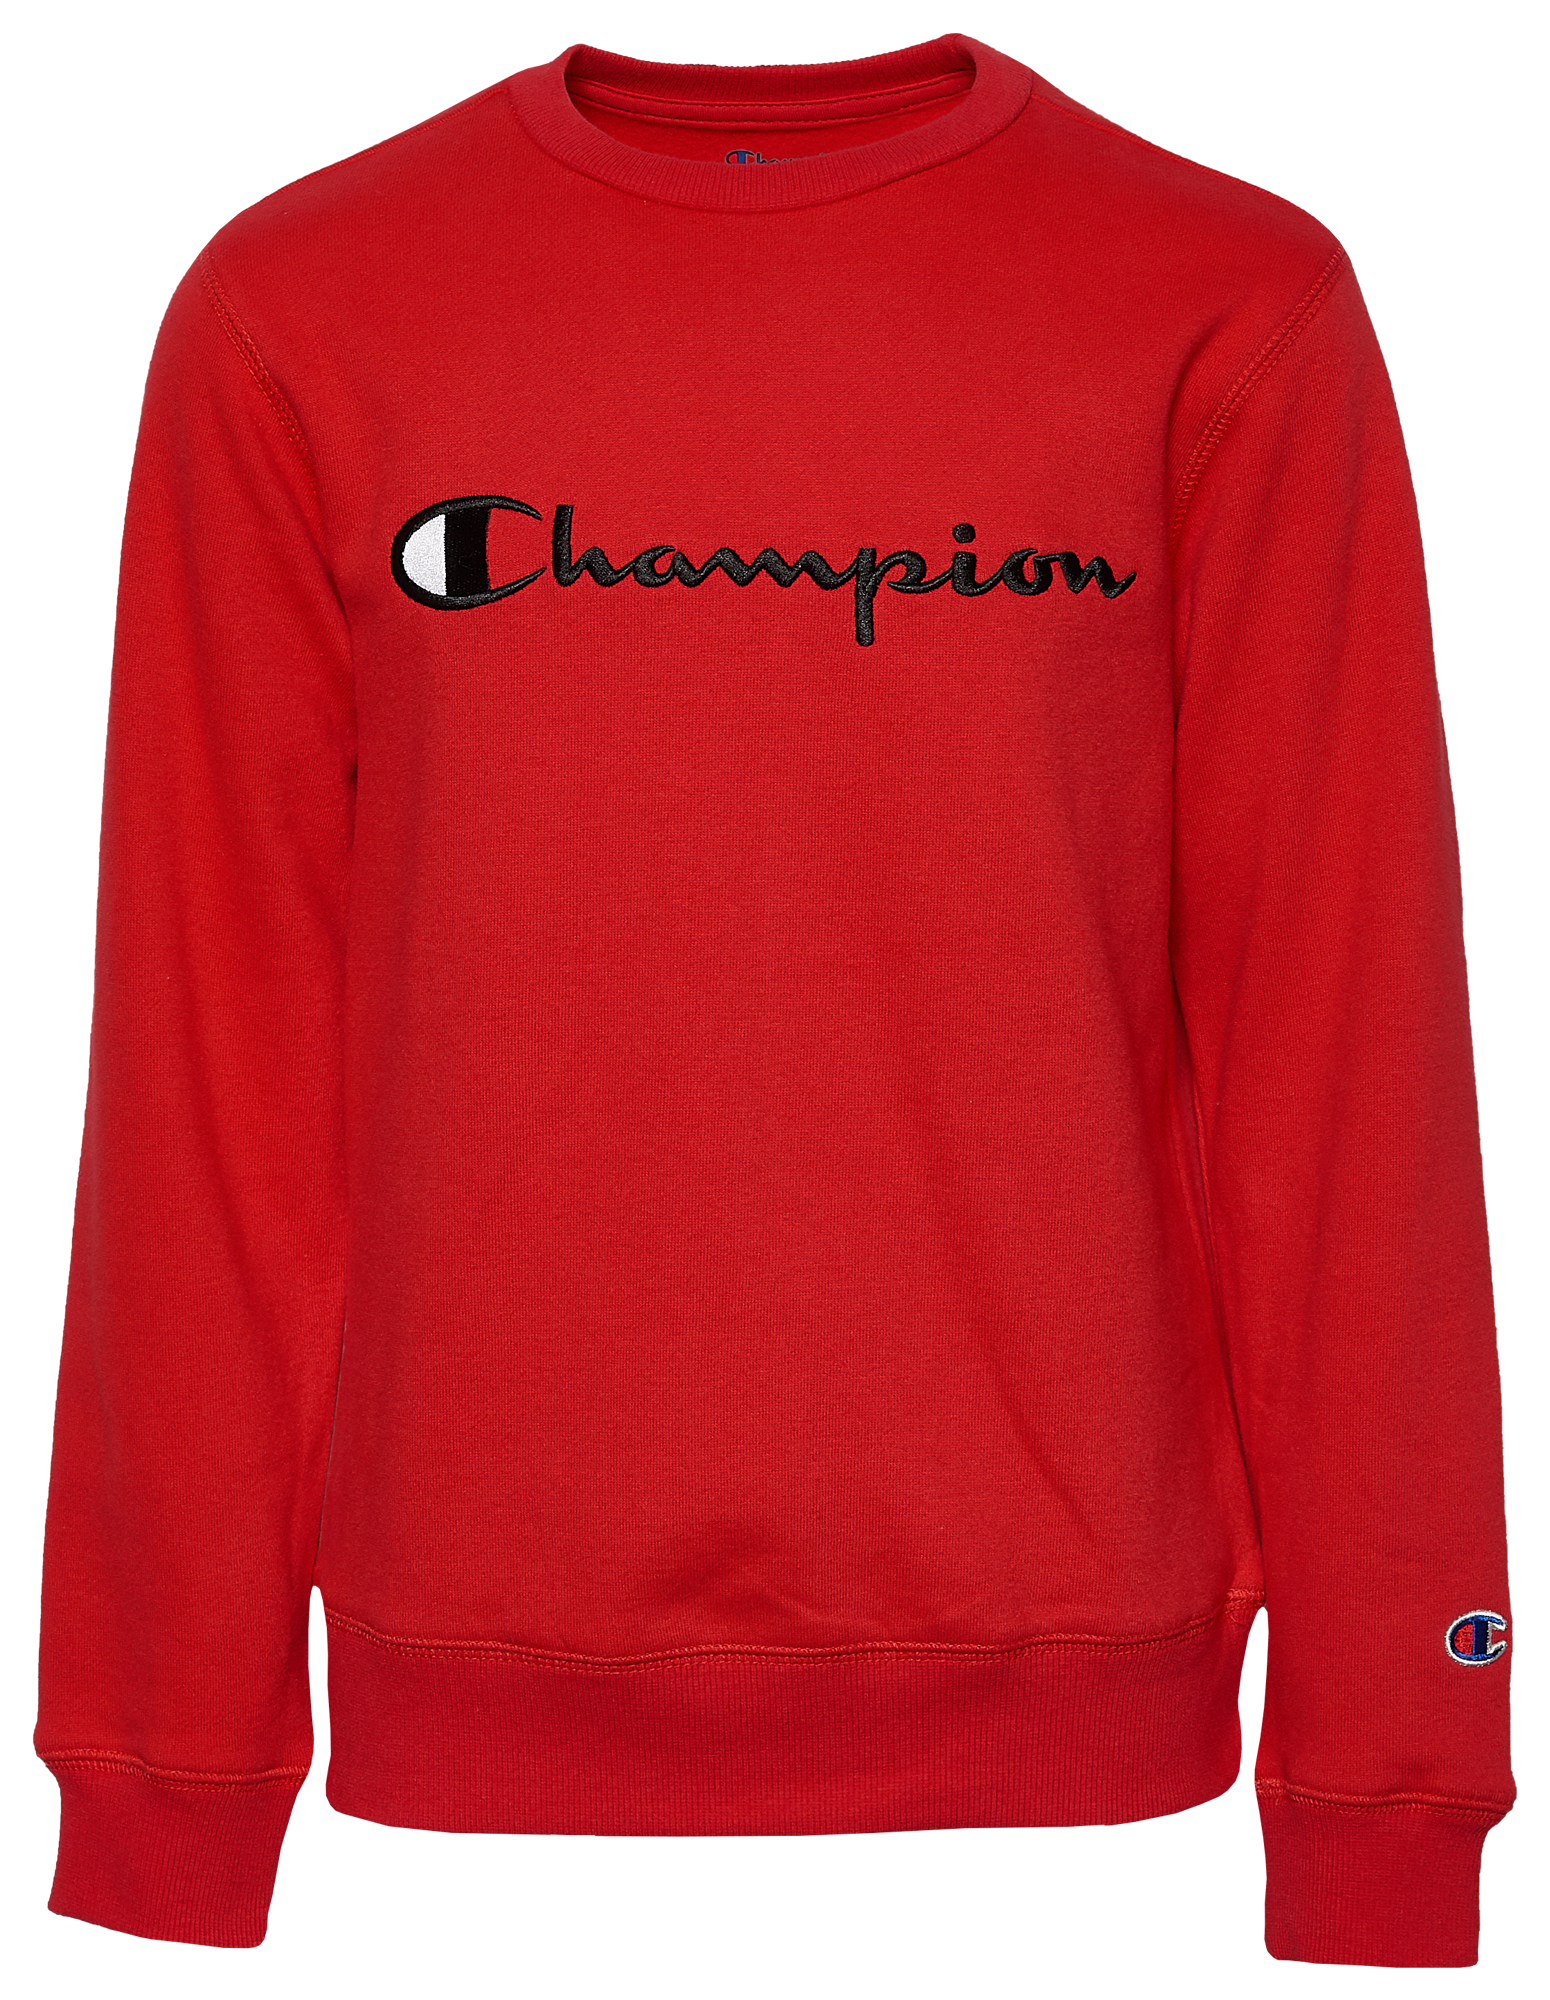 Kids' Champion Clothing | Eastbay